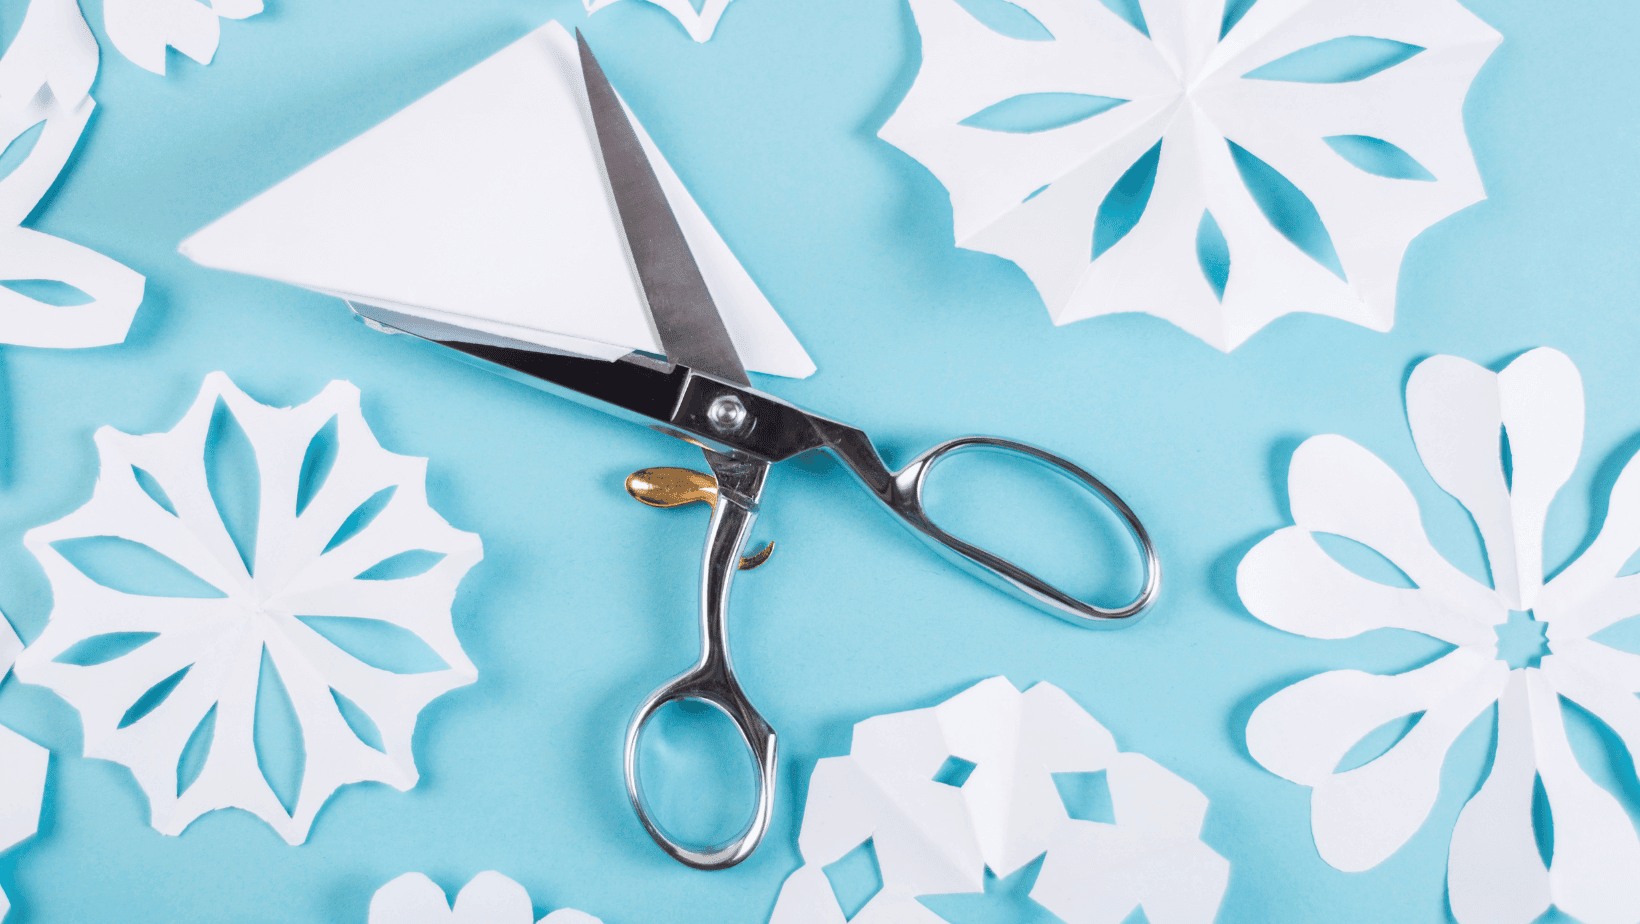 scissors resting on a blue table with coffee filter snowflakes